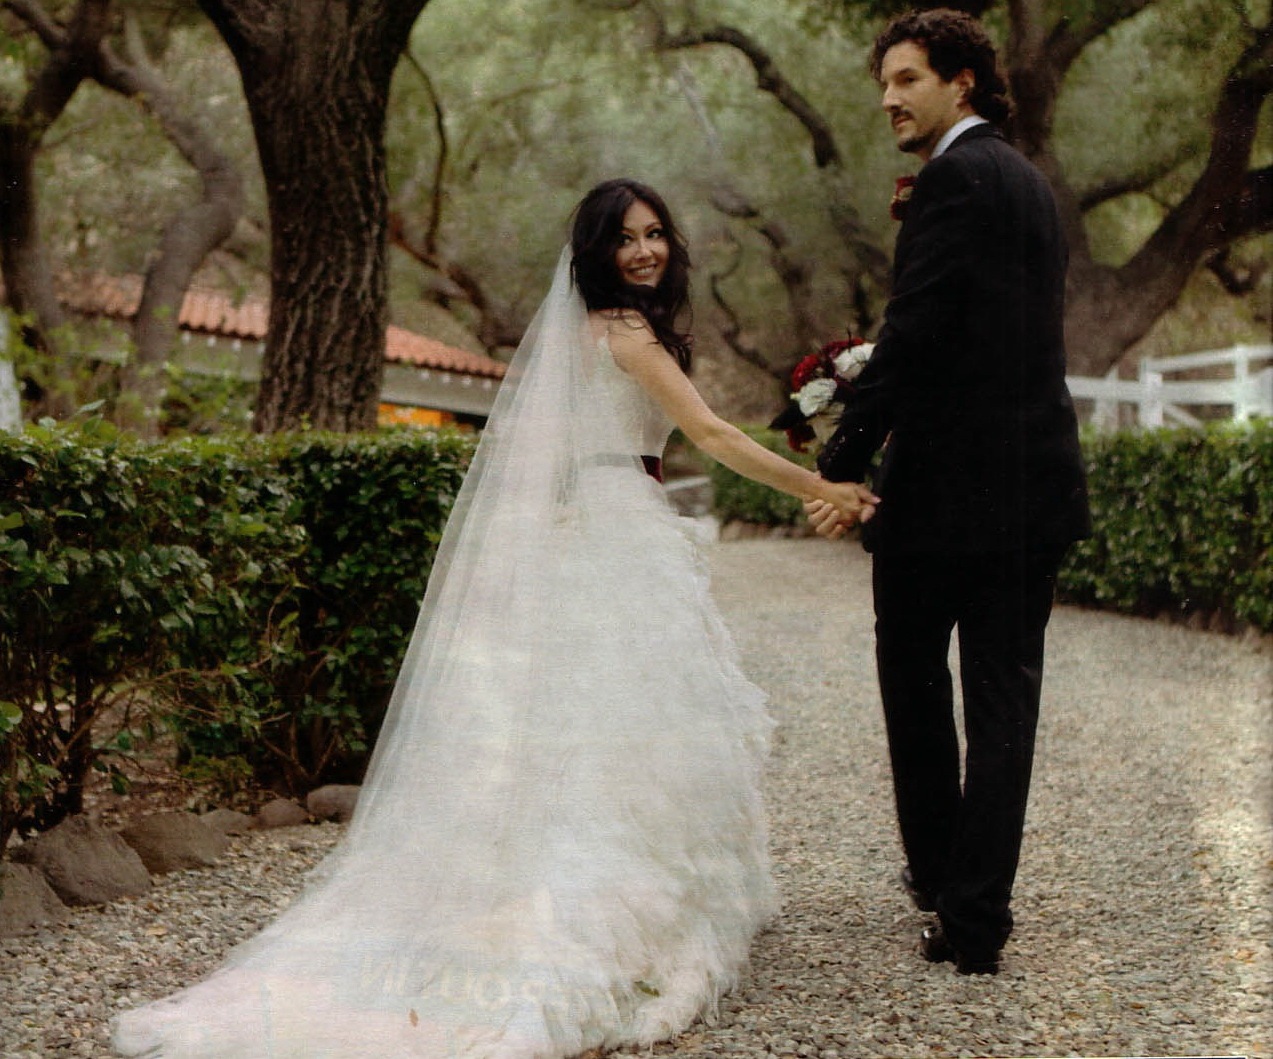 Shannen Doherty  Wedding Pictures  Shannen Doherty Photo 27724852 